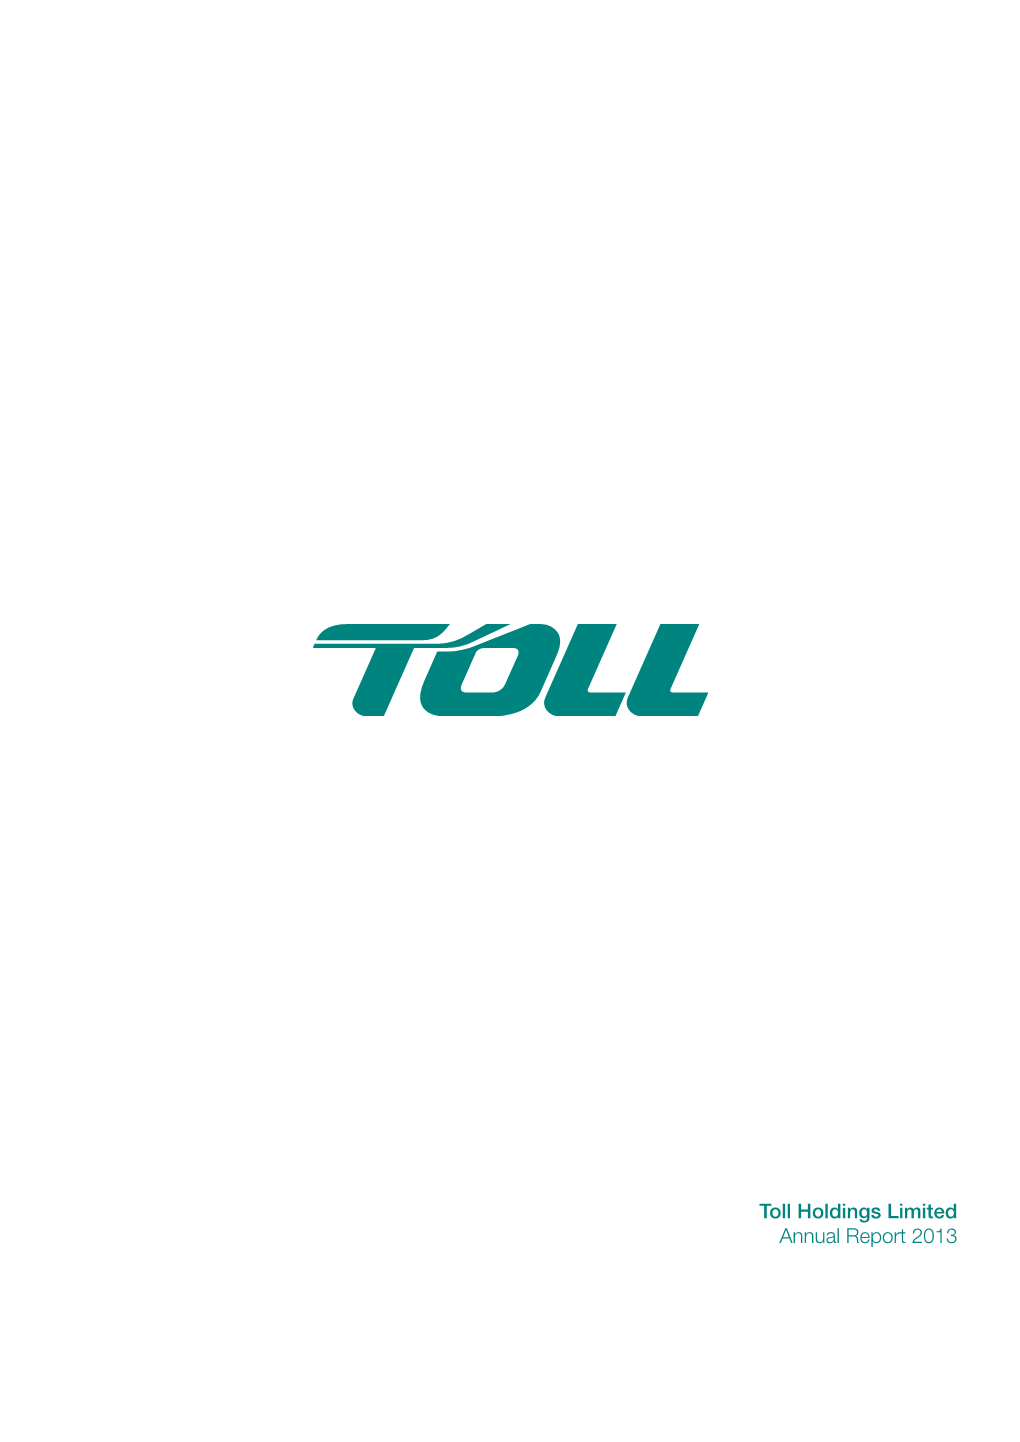 Toll Holdings Limited Annual Report 2013 Contents